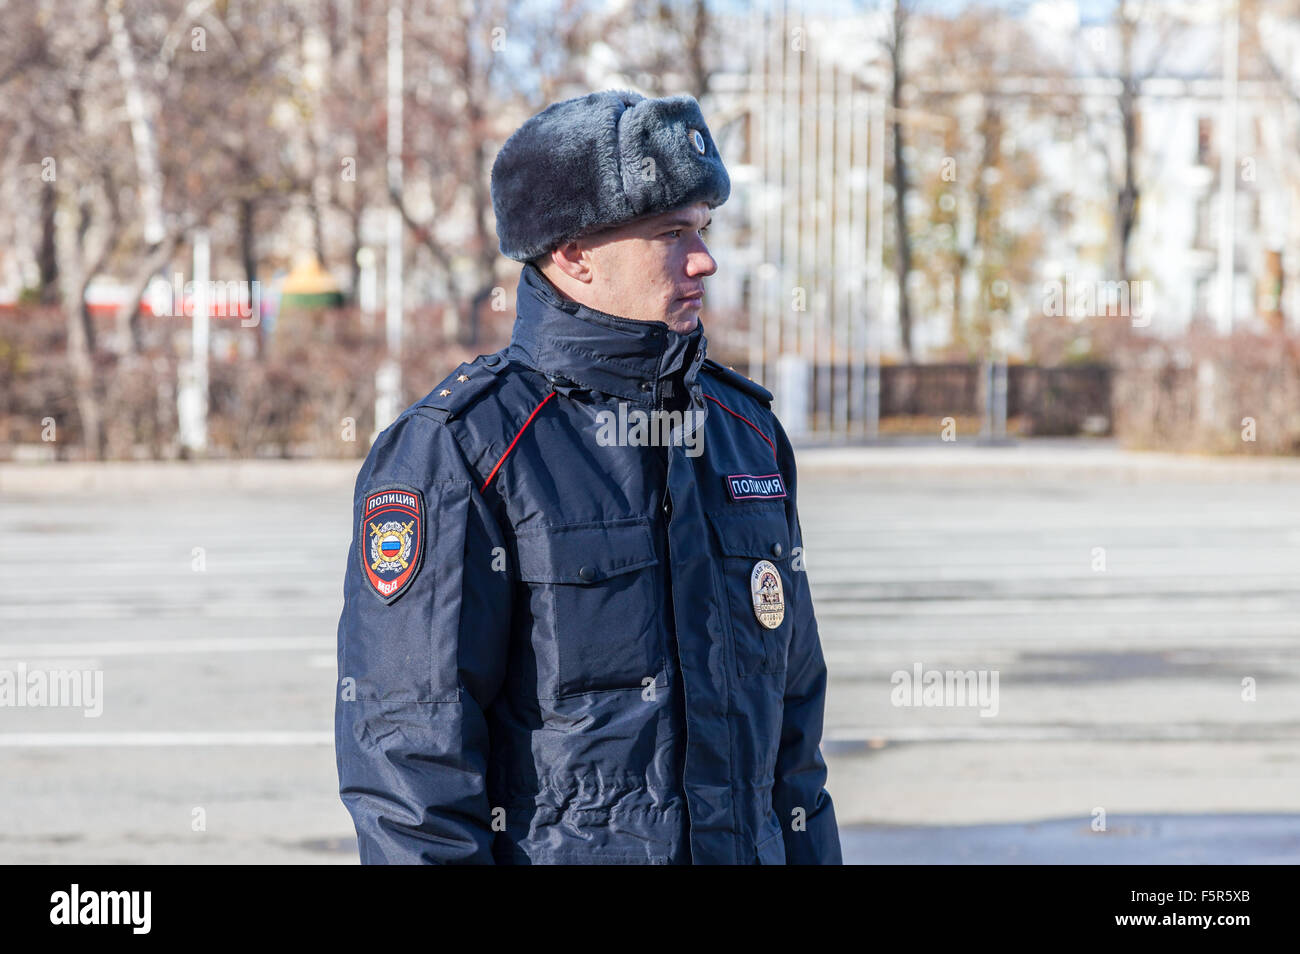 Unidentified Russian police officer in winter uniform Stock Photo